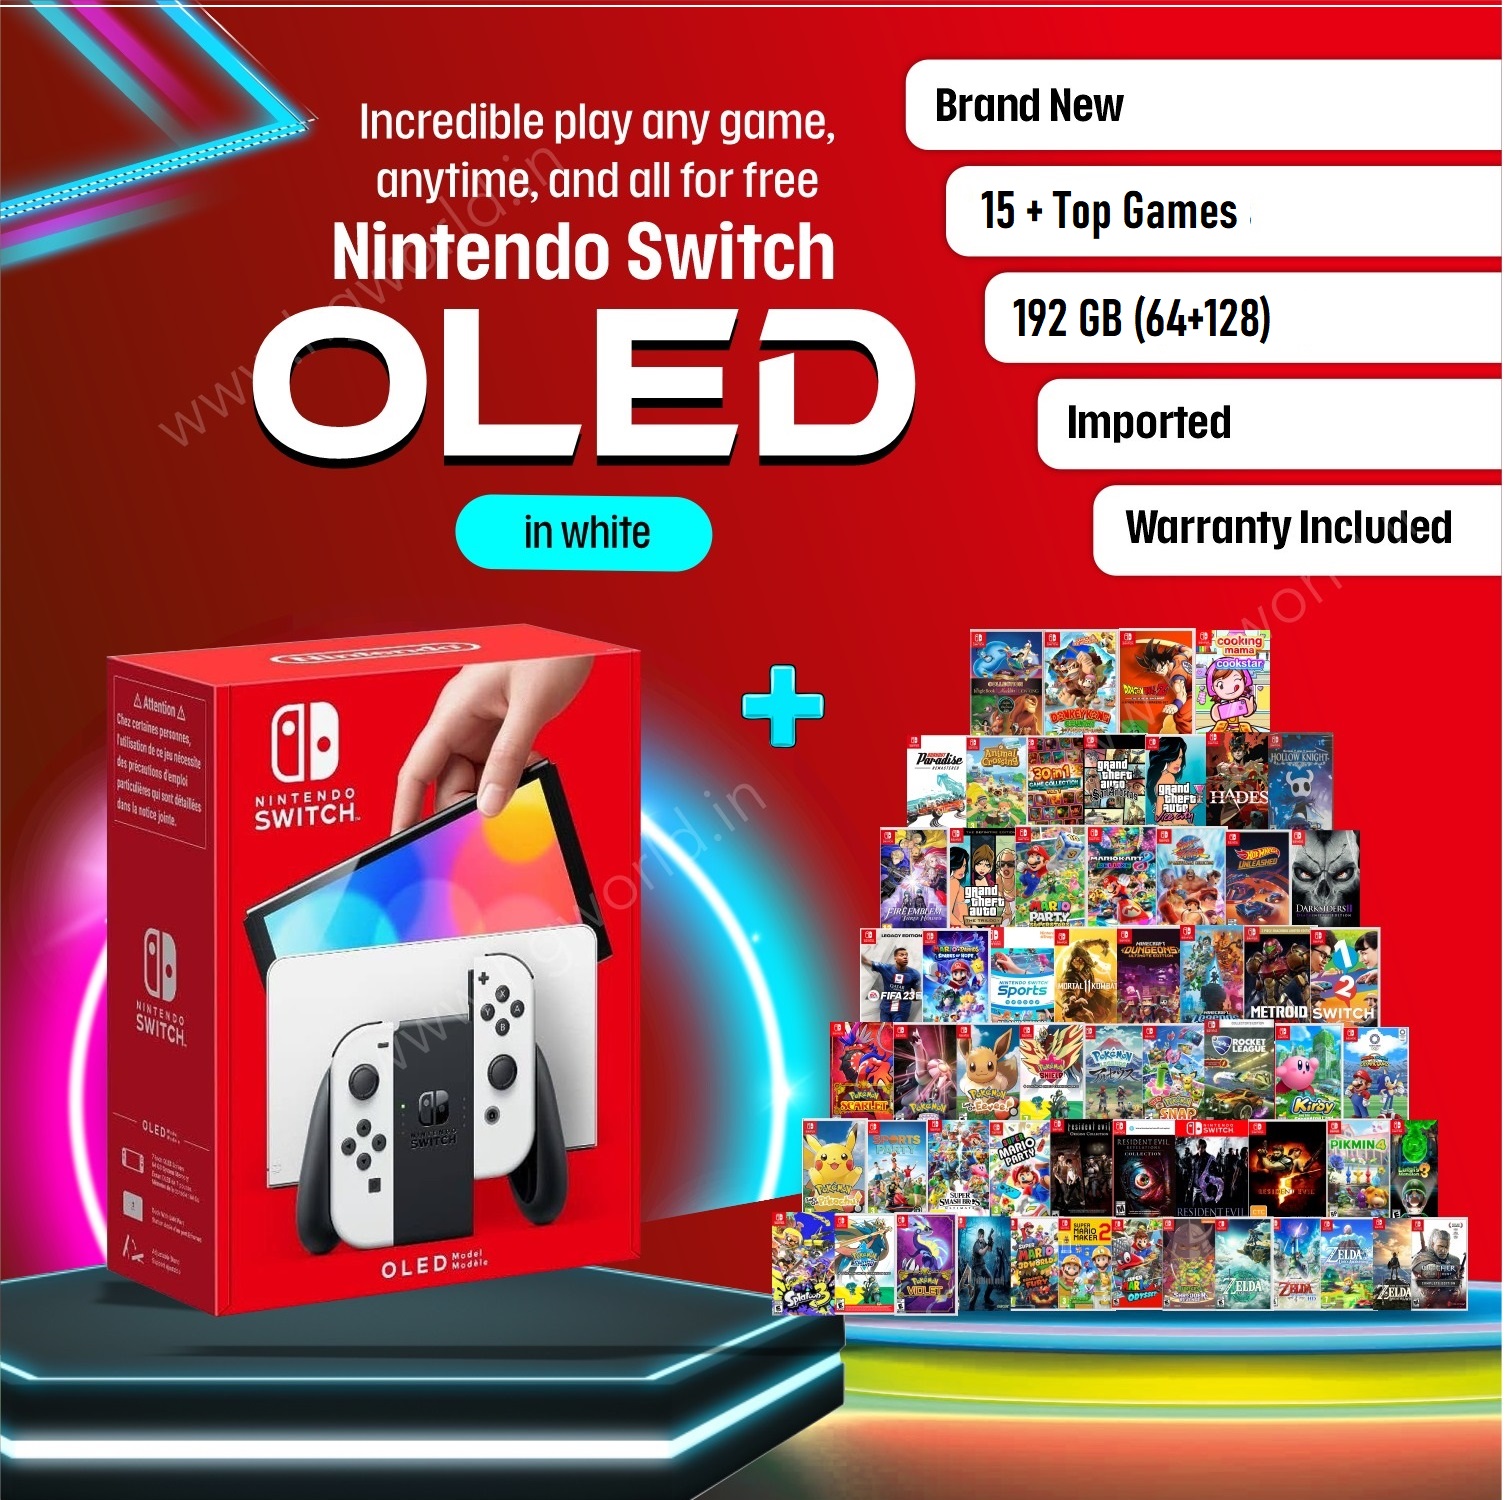 NINTENDO Switch Oled | 15+ Top Games Free | 192 GB Internal(64+128) |  Handheld Portable Gaming Console | All Standard Accessories | Warranty  Included 